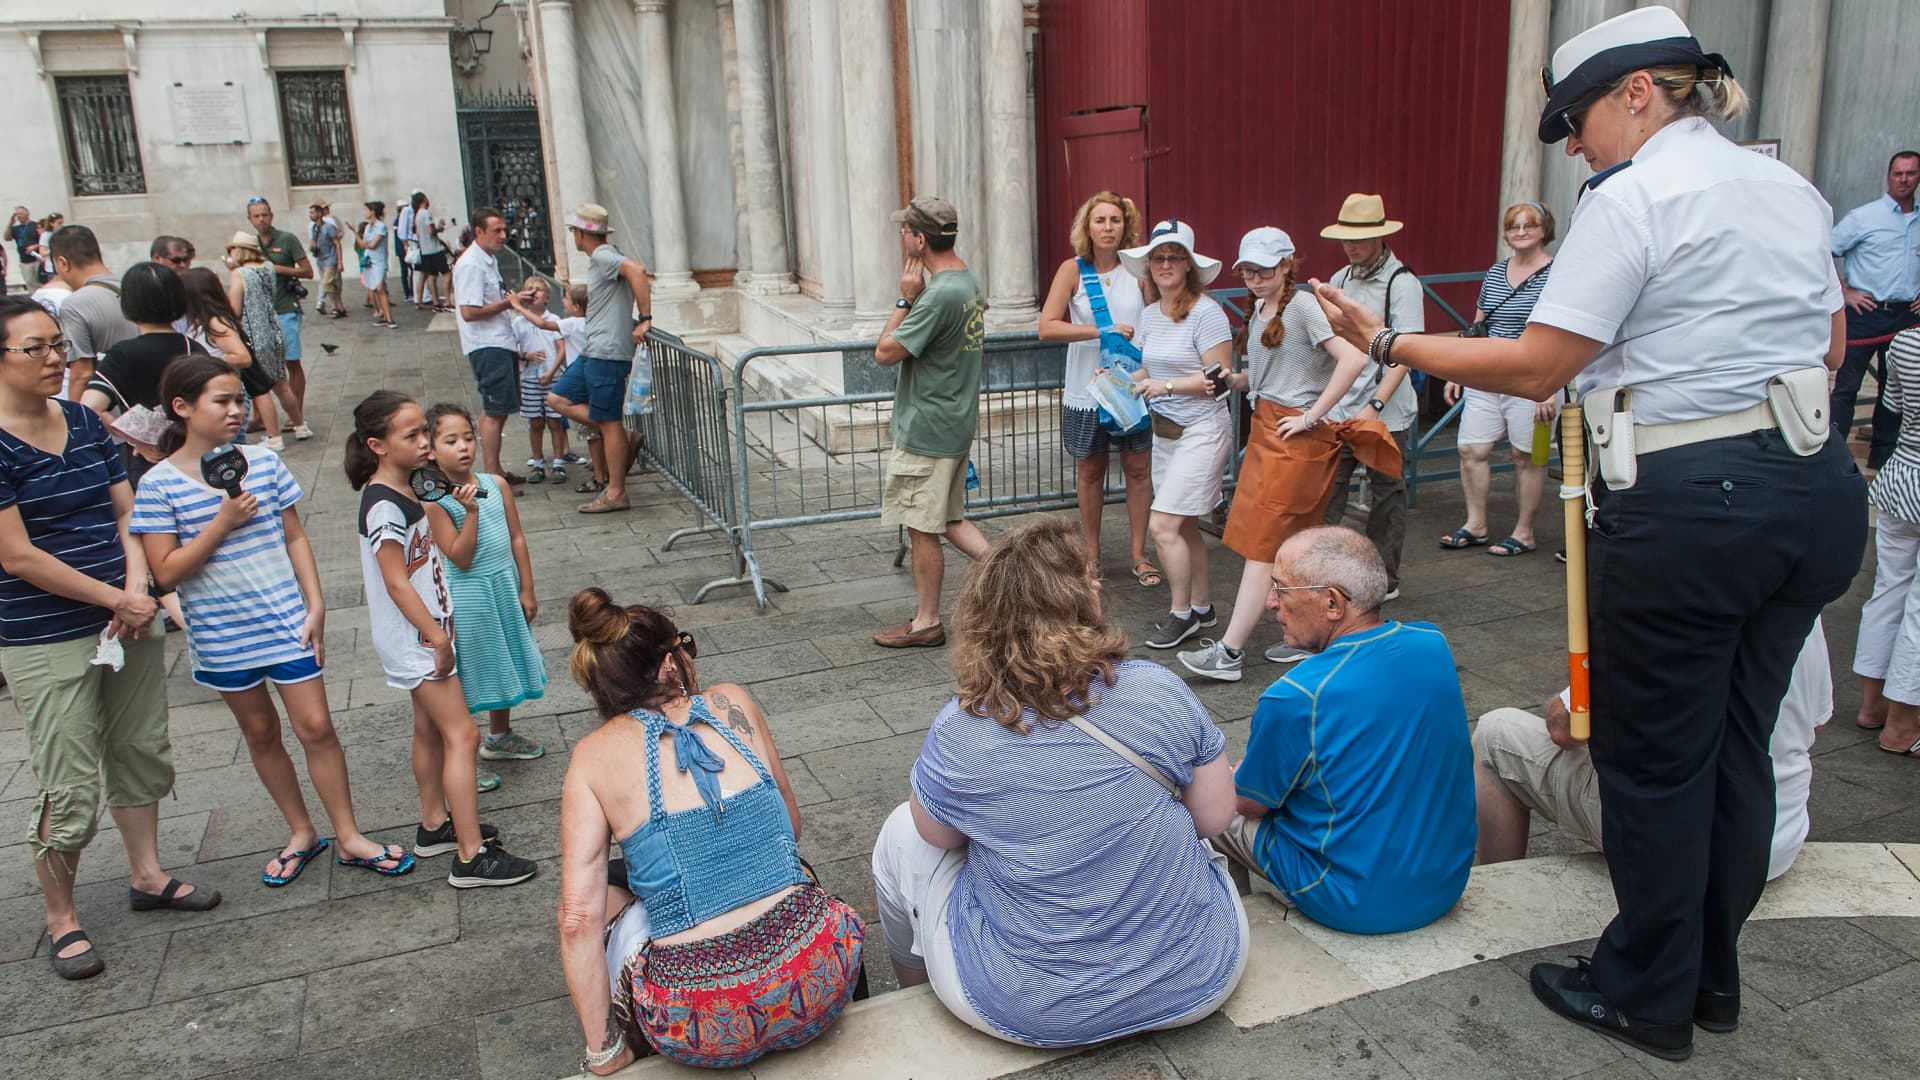 Tourists who sit or lie on monuments, bridges, steps or walkways in Venice can be banned from the area and subject to fines of 100-200 euros ($105-$210).